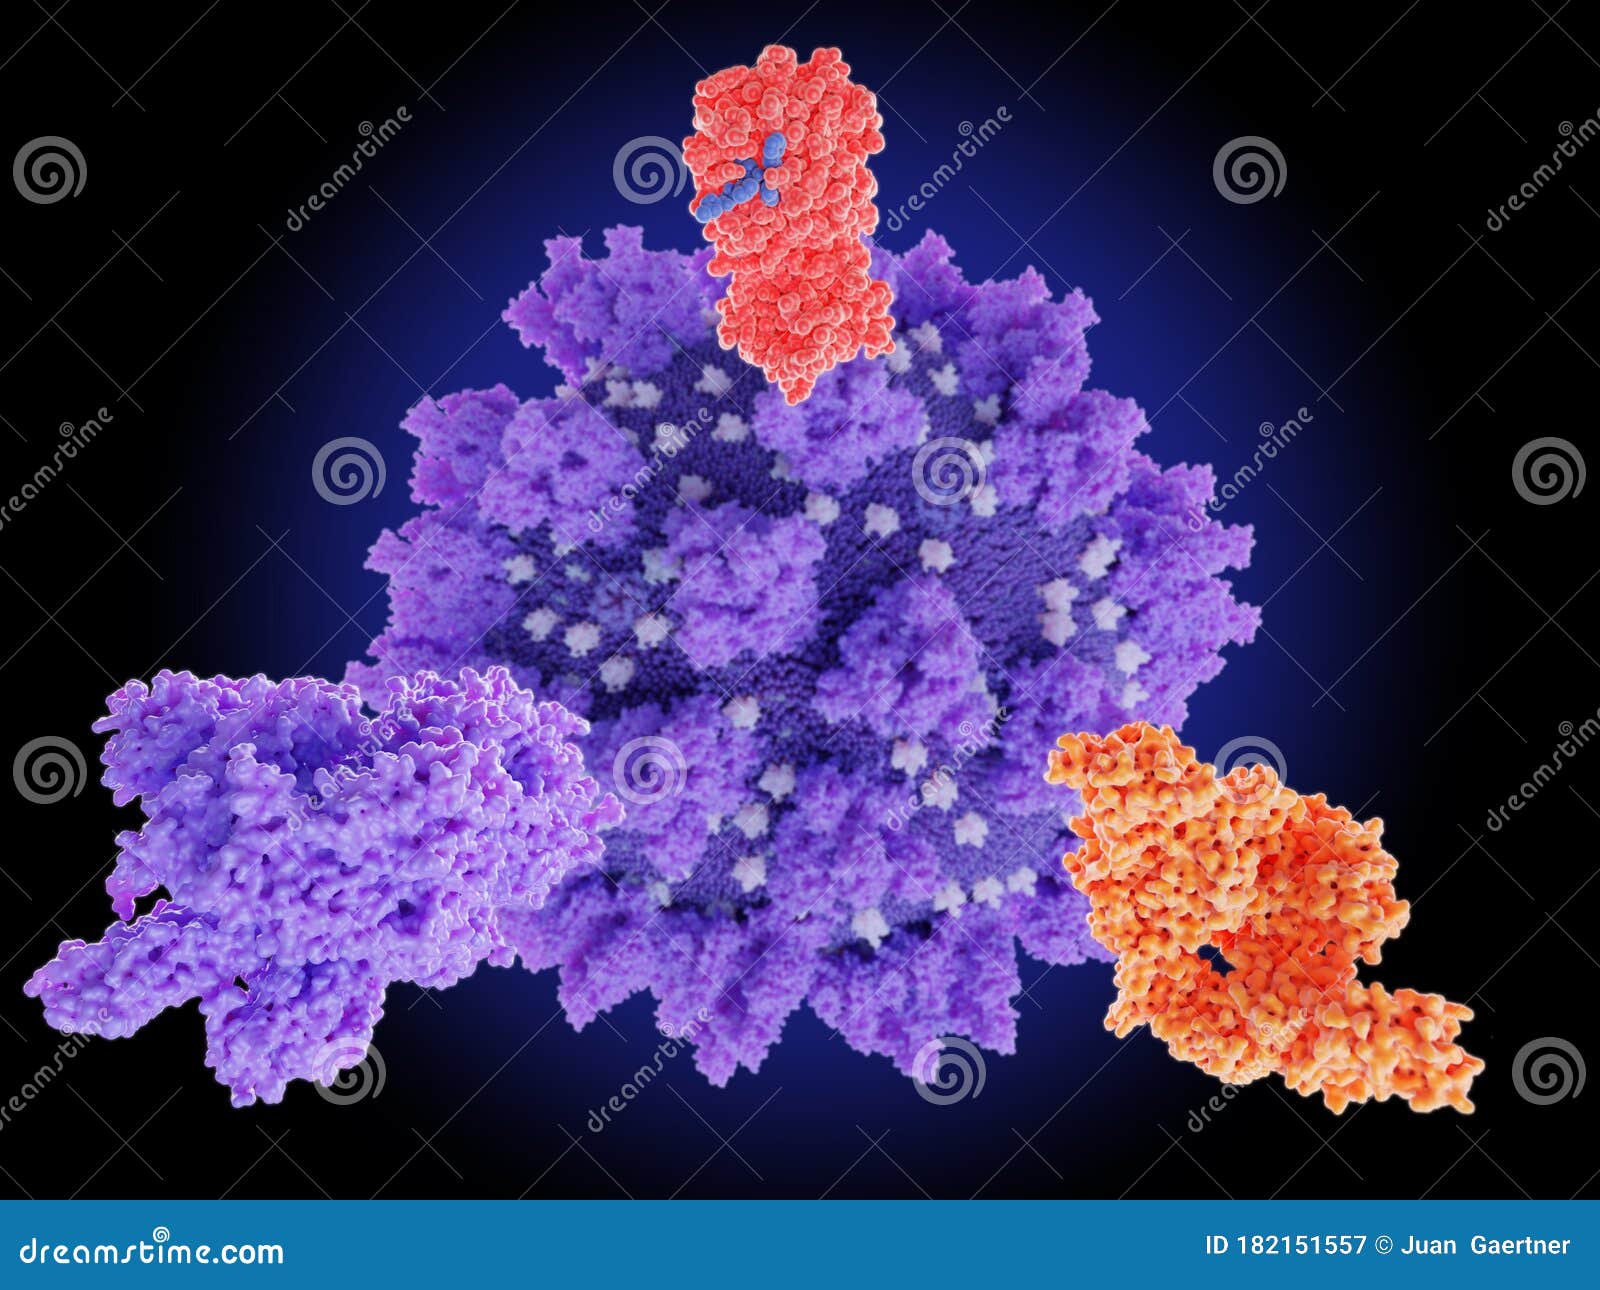 potential drug target proteins of coronavirus sars-cov-2:spike protein, rna polymerase, main protease